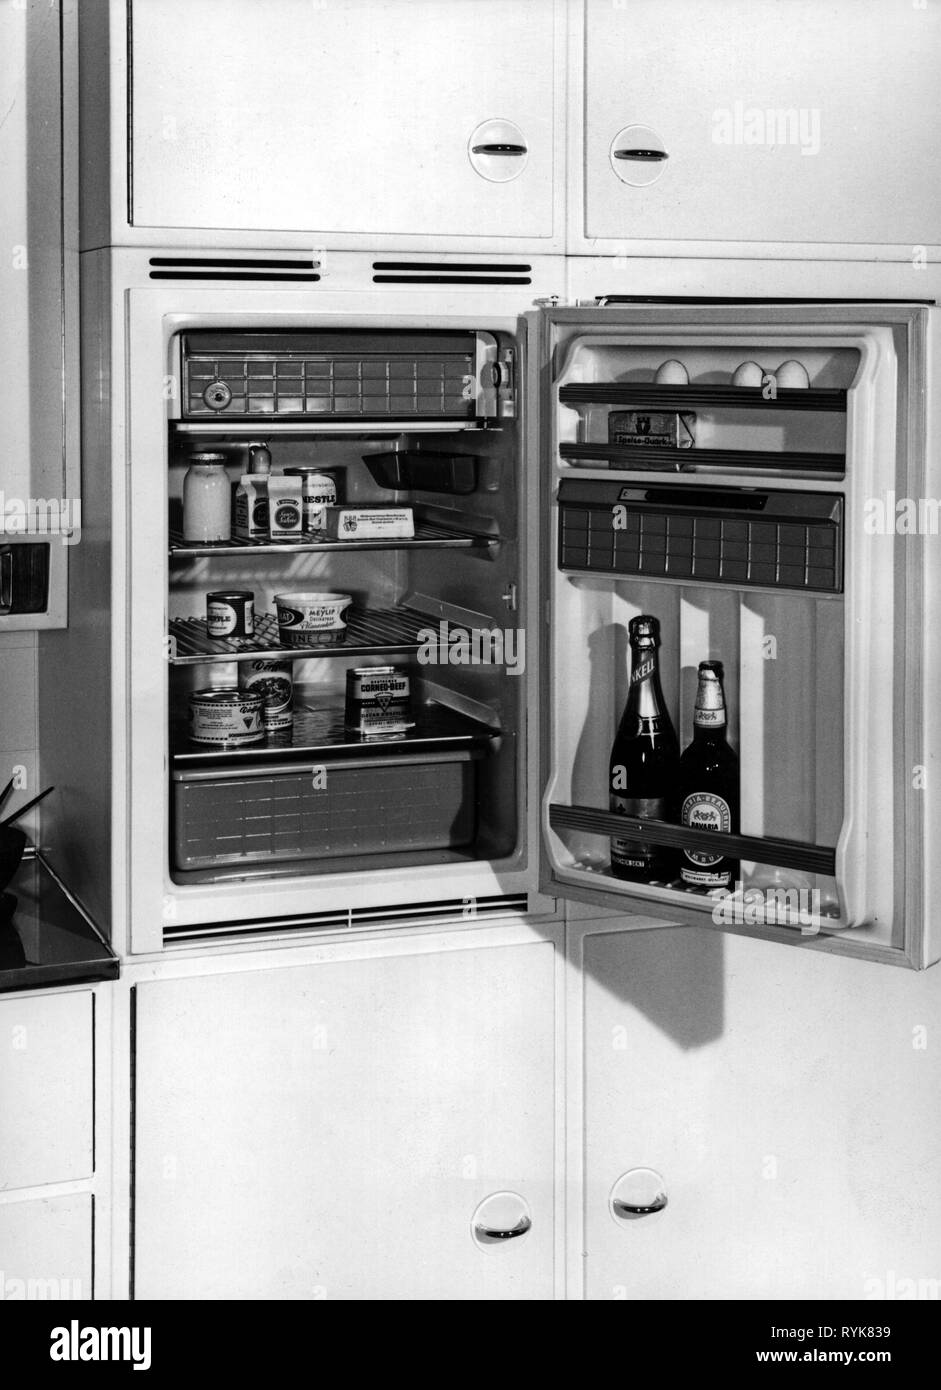 household, kitchen and kitchenware, built-in fridge 503 by 'Gaggenau', 1950s, Additional-Rights-Clearance-Info-Not-Available Stock Photo